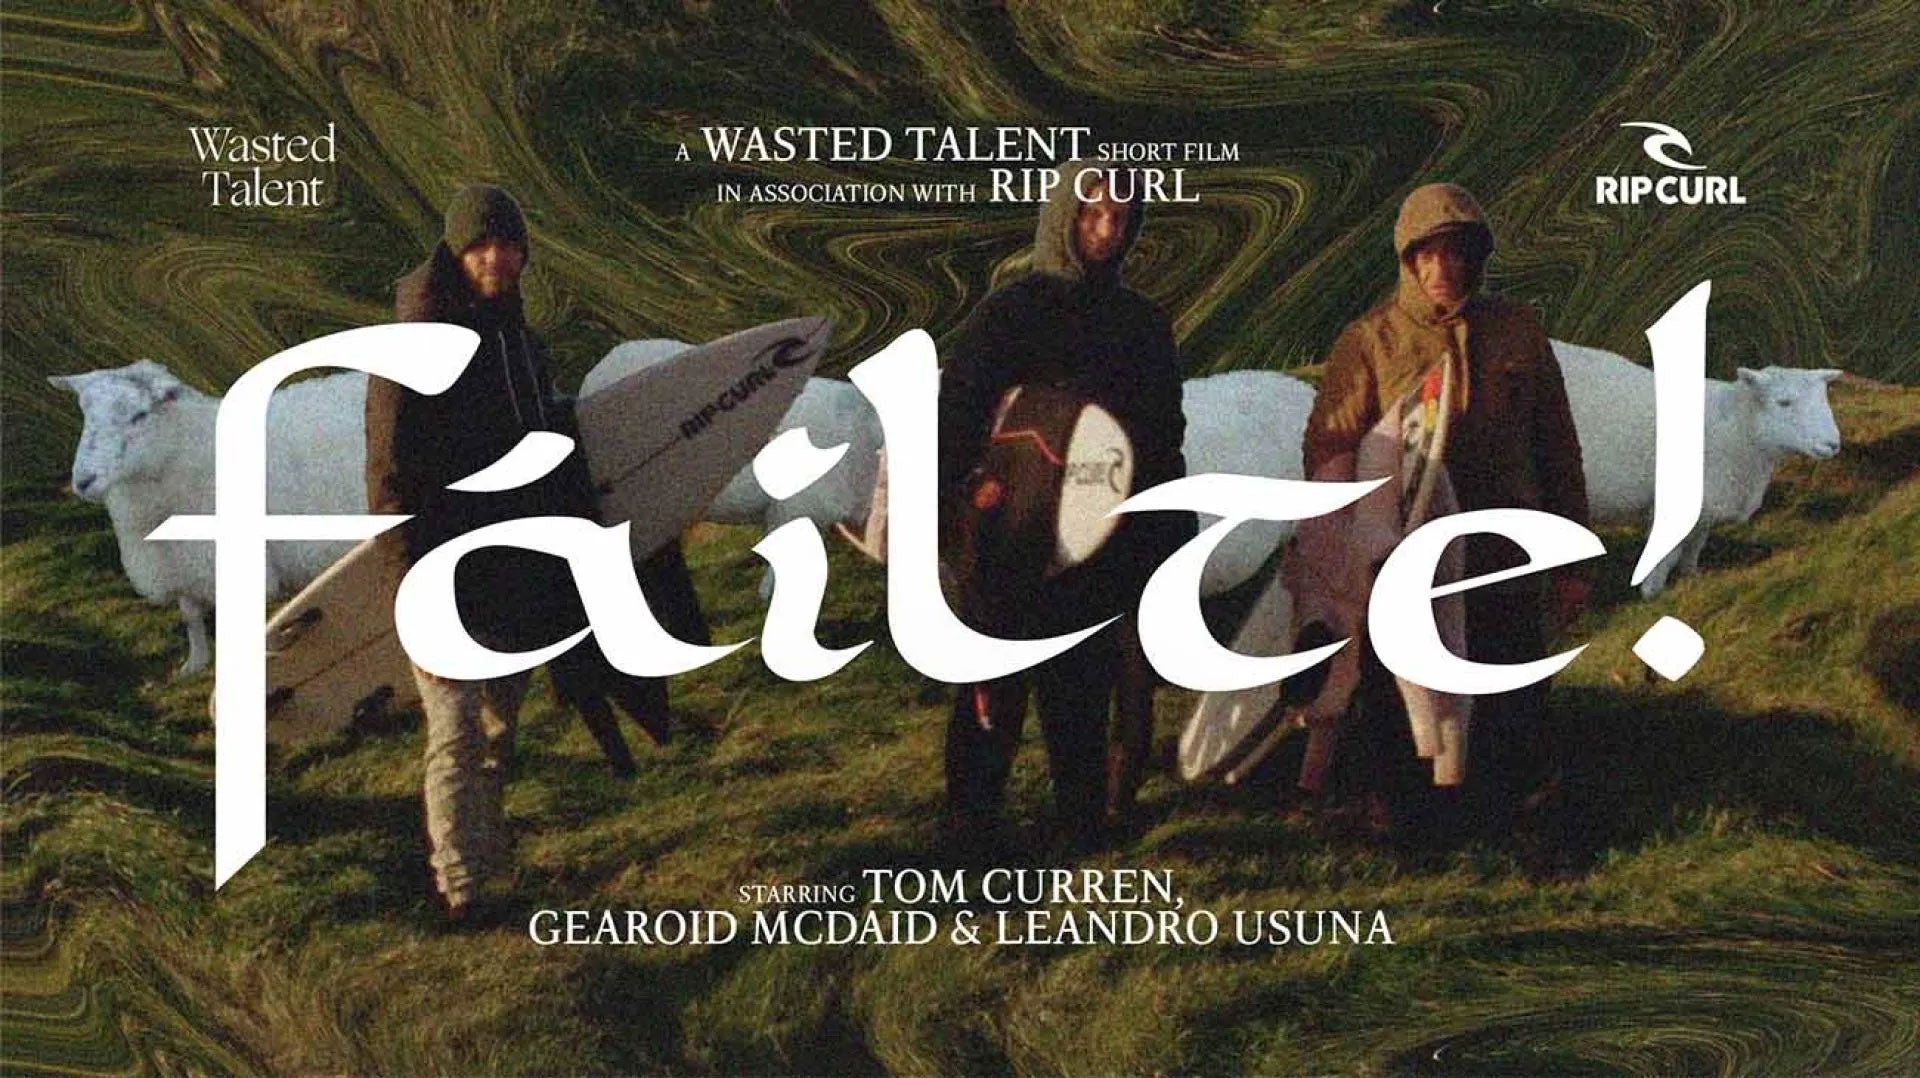 FÁILTE Starring Tom Curren, Gearoid McDaid & Leandro Usuna on The Search.